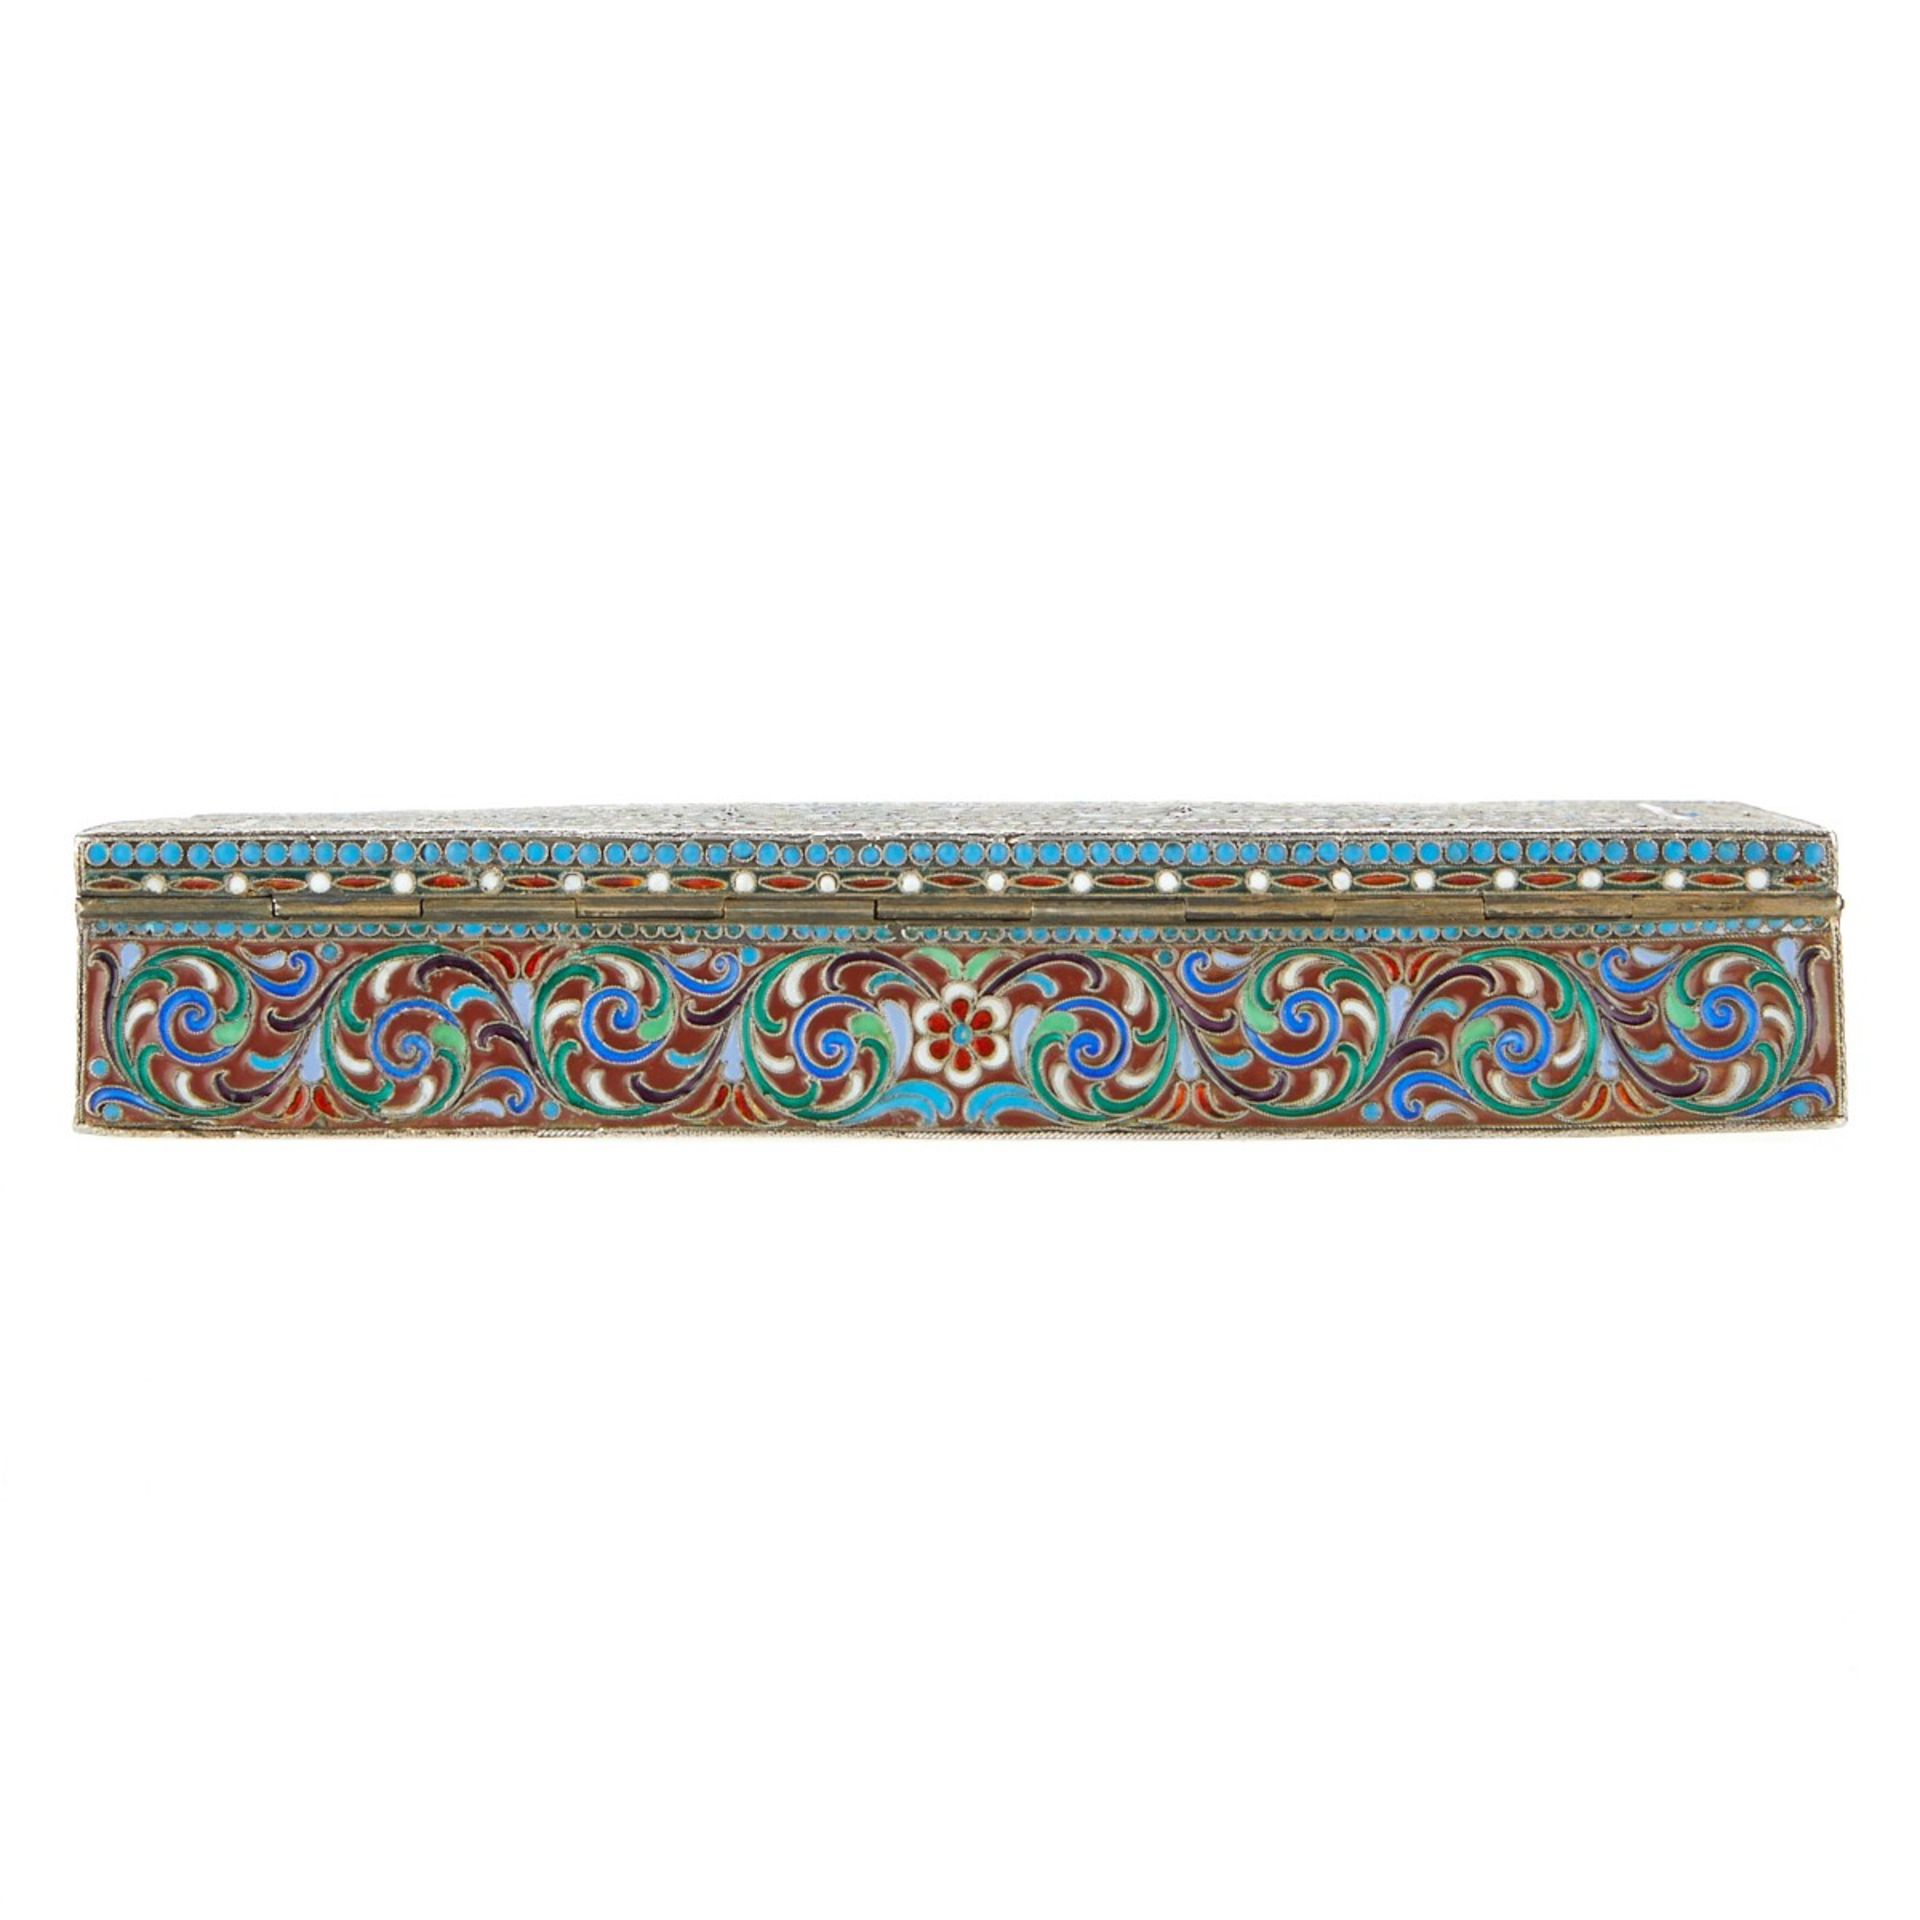 Russian Enameled Silver Tabletop Cigarette Box - Image 5 of 17